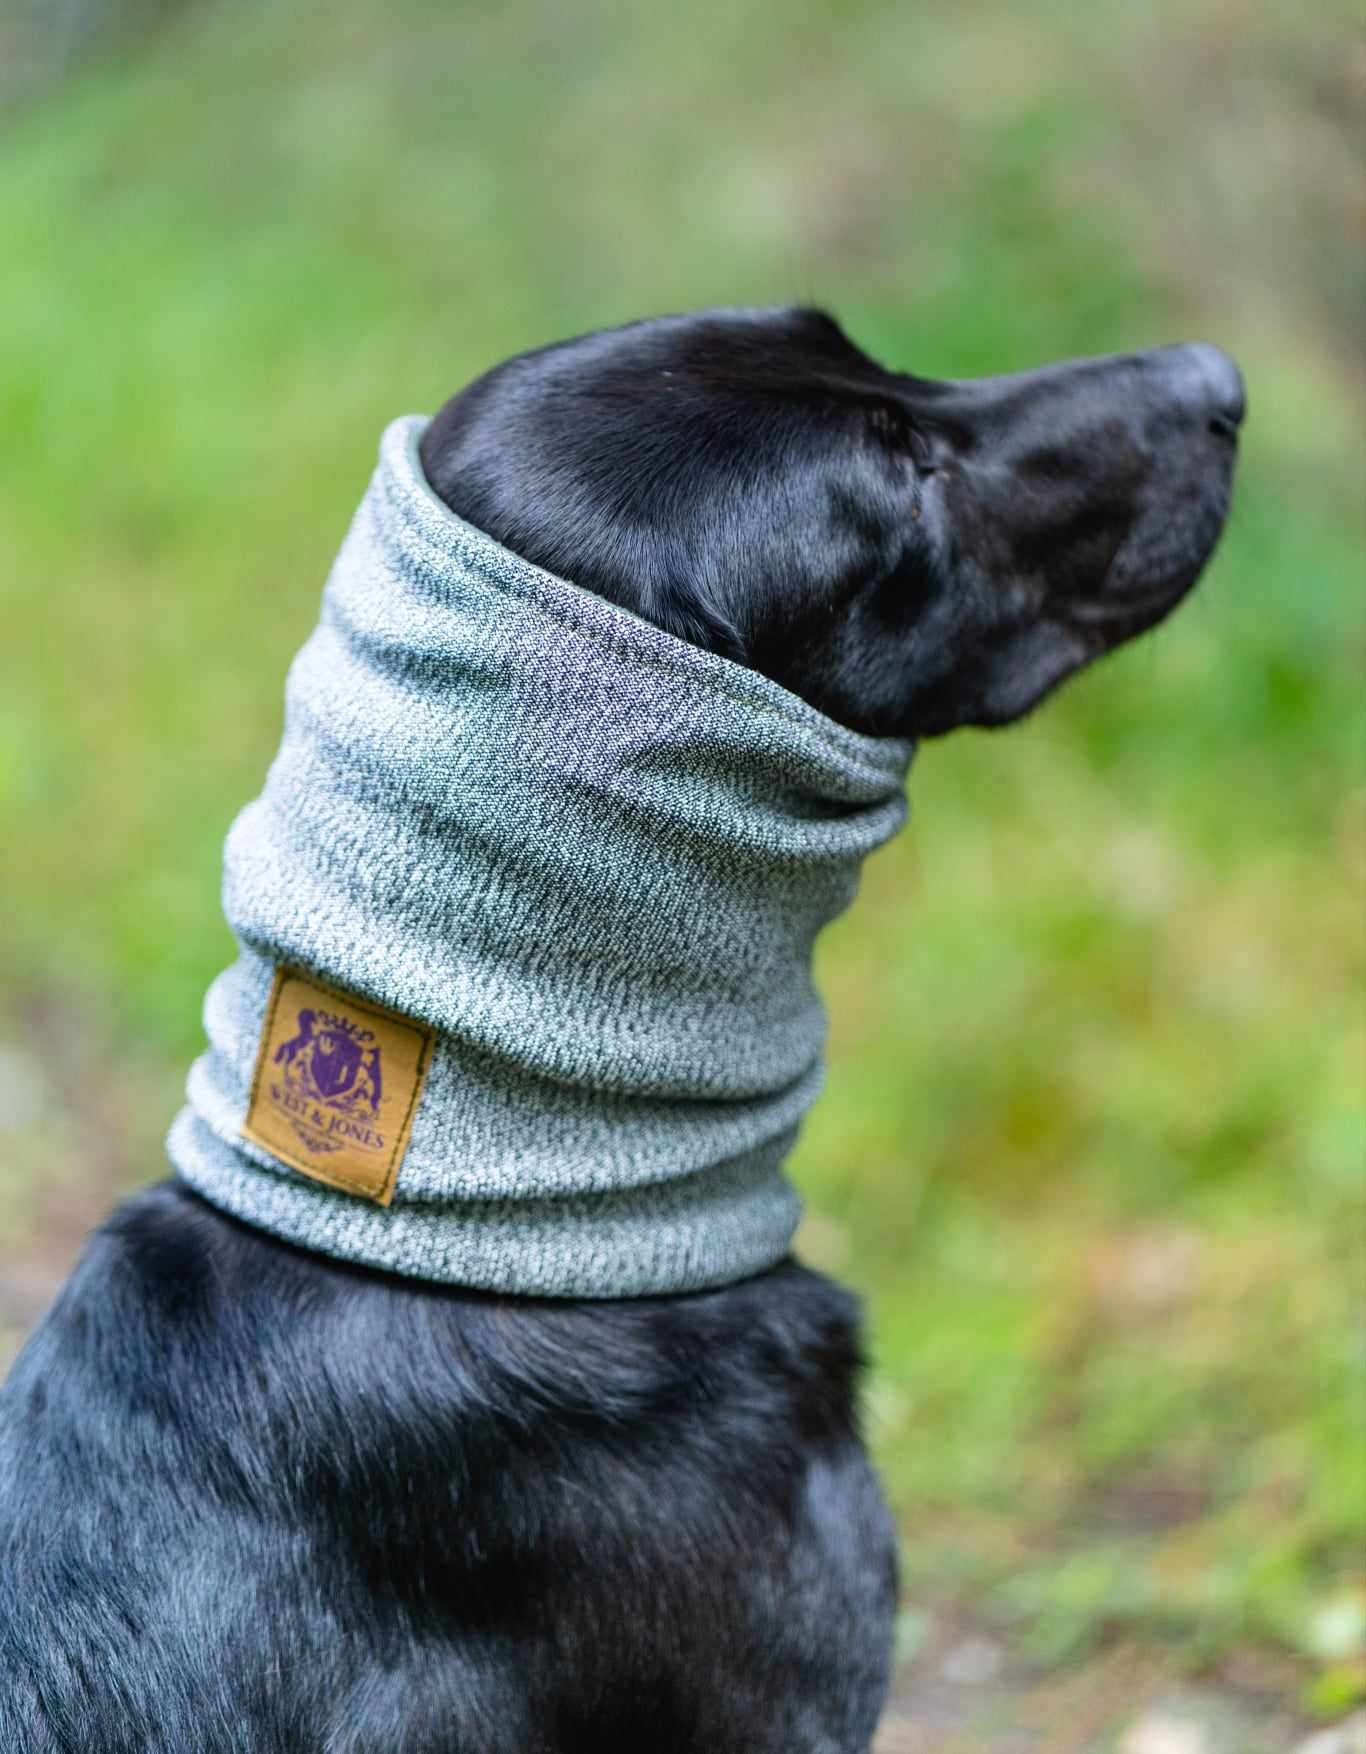 West & Jones Devon Snood- a safety snood to protector dogs from cuts, puncture and bite wounds. Medium, Moss Green- logo on display.